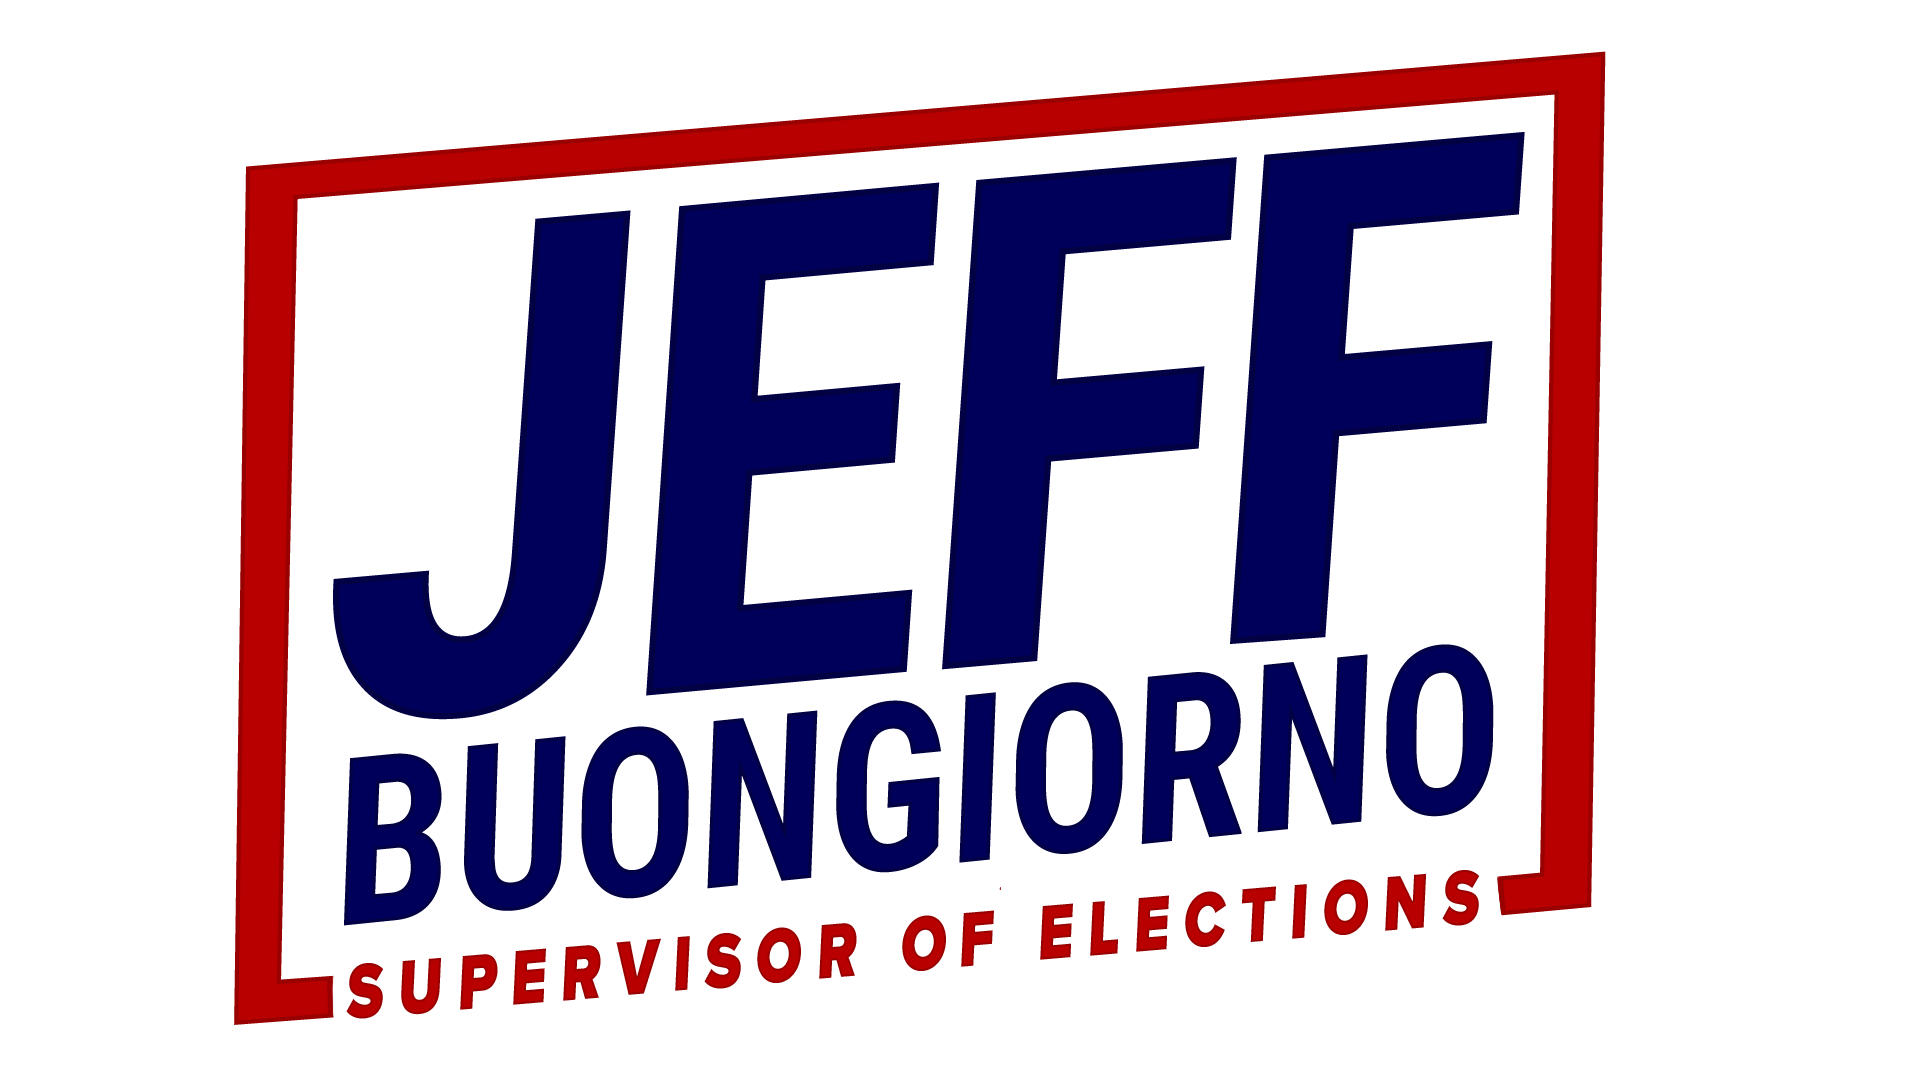 Jeff Buongiorno for Palm Beach County Supervisor of Elections